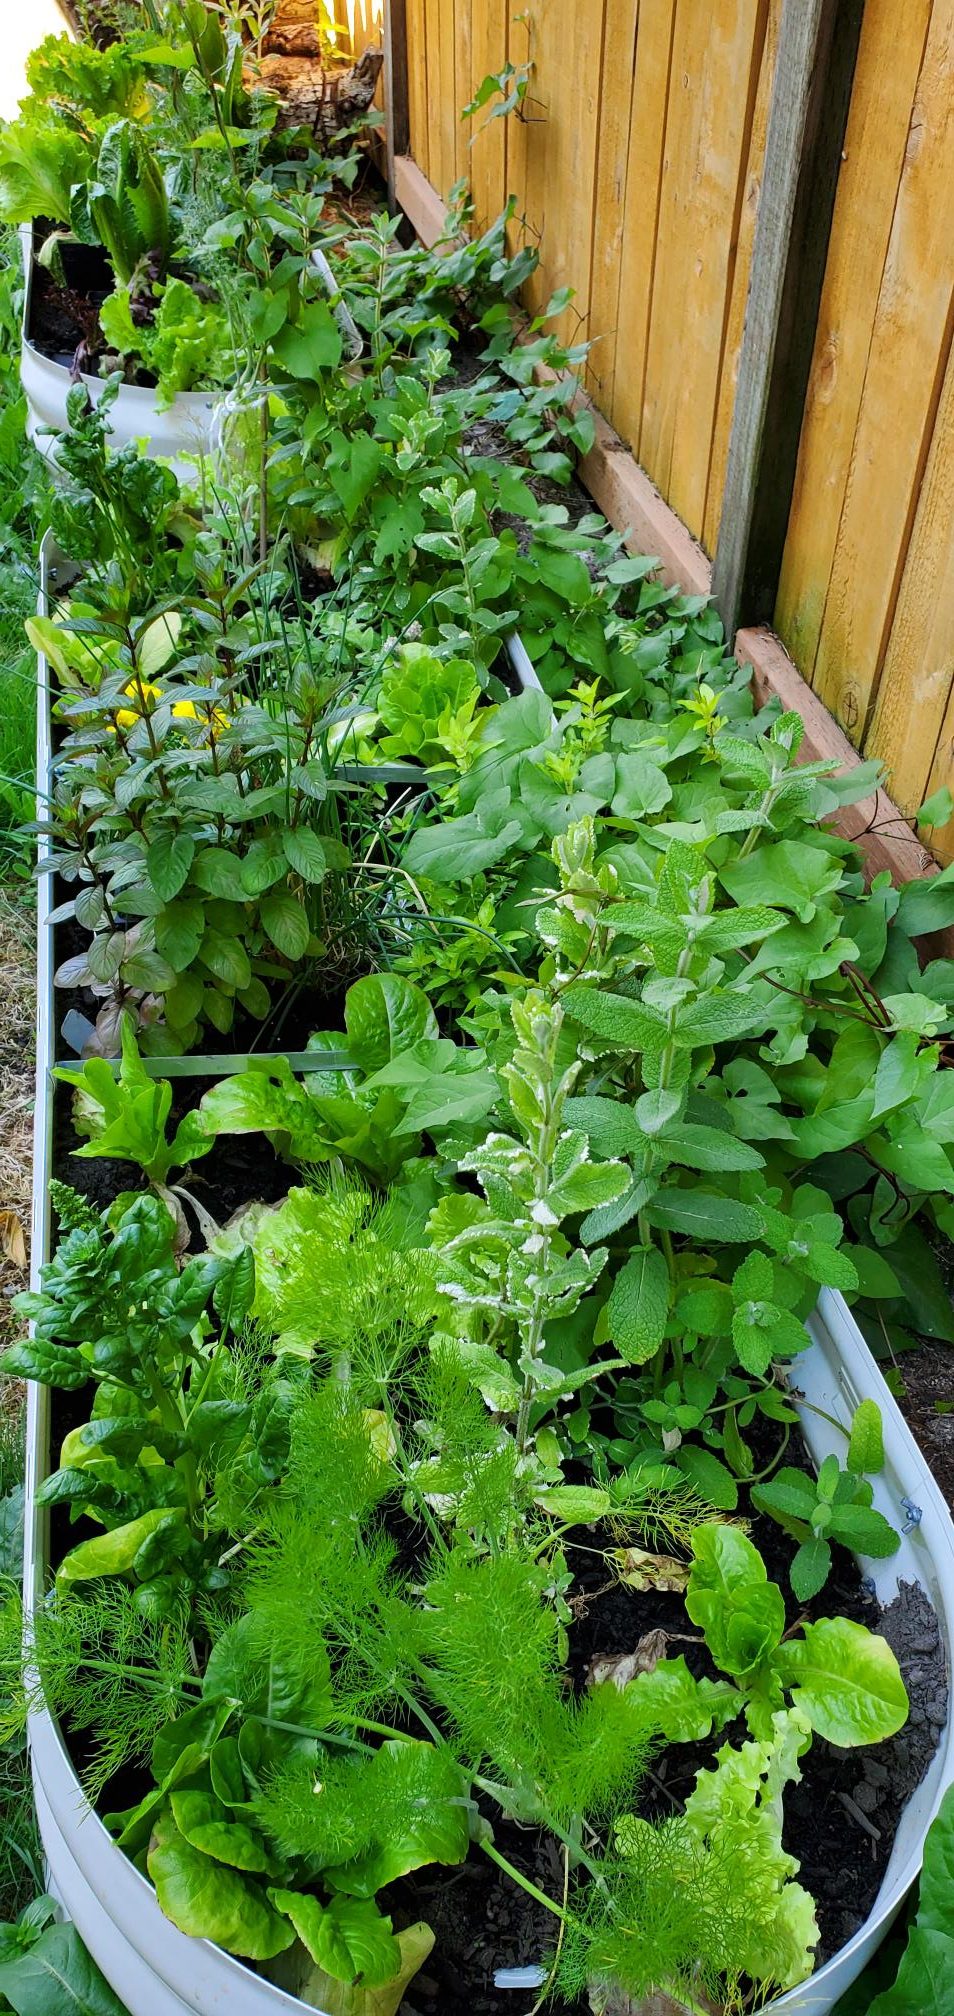 Mint, lettuce, and dill in our backyard homestead.